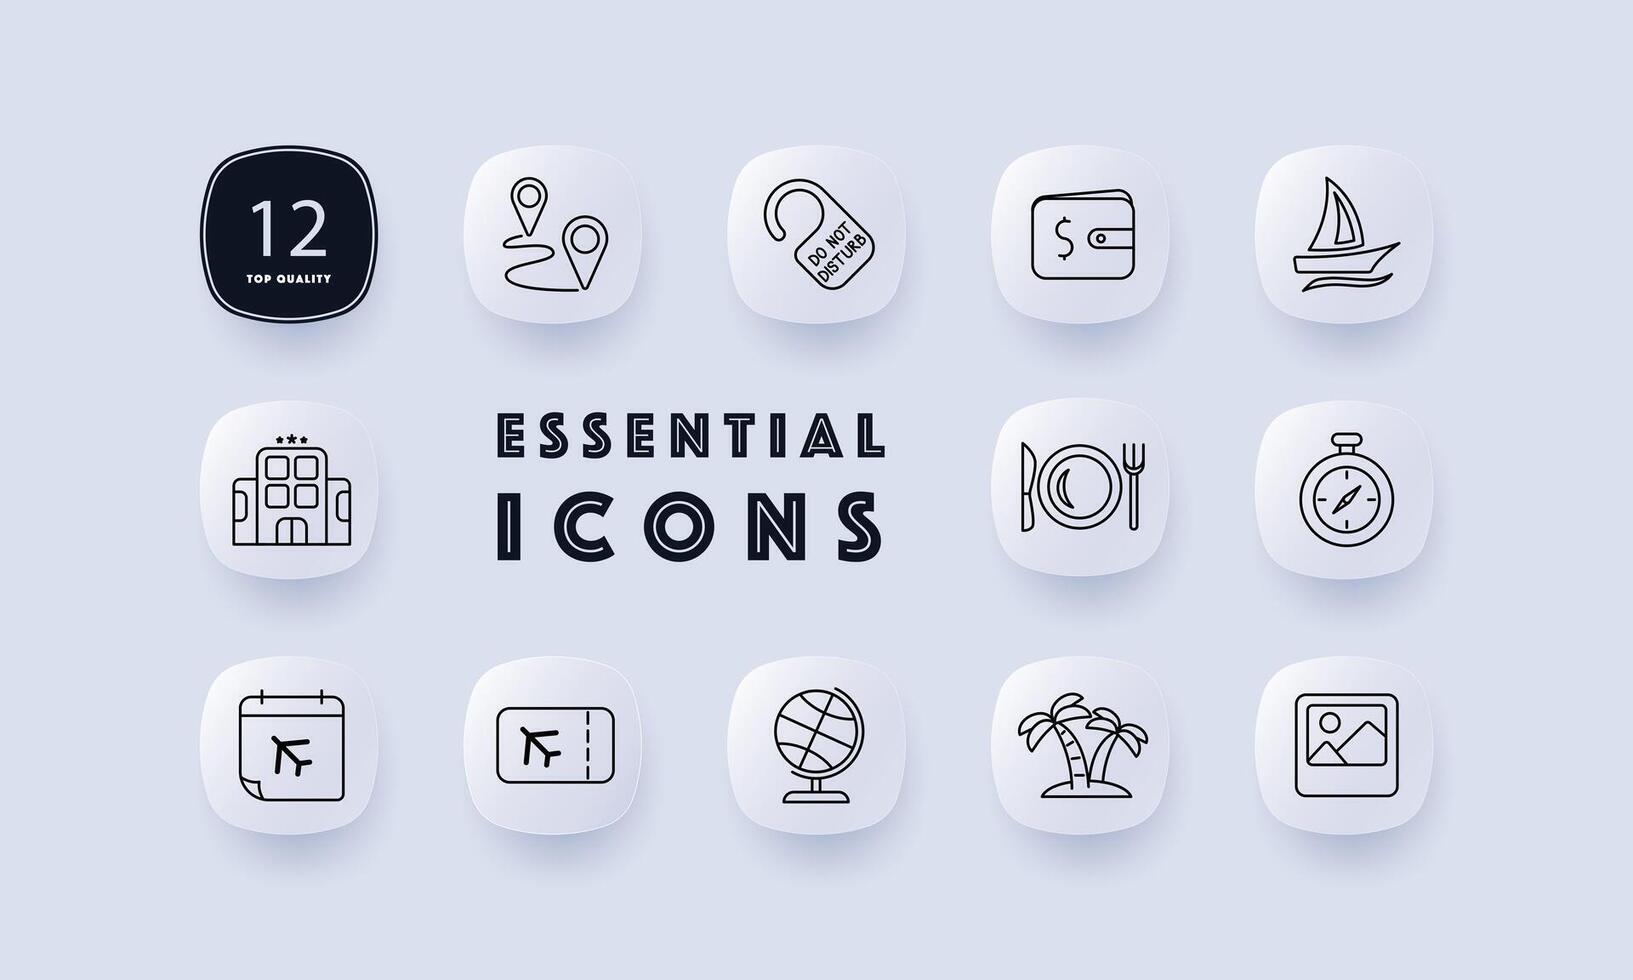 Trip set icon. Geolocation, travel, path from one point to another, wallet, hotel, tropical island, vacation, flight, globe, do not disturb icon. Tourism and wandering concept. Neomorphism style. vector